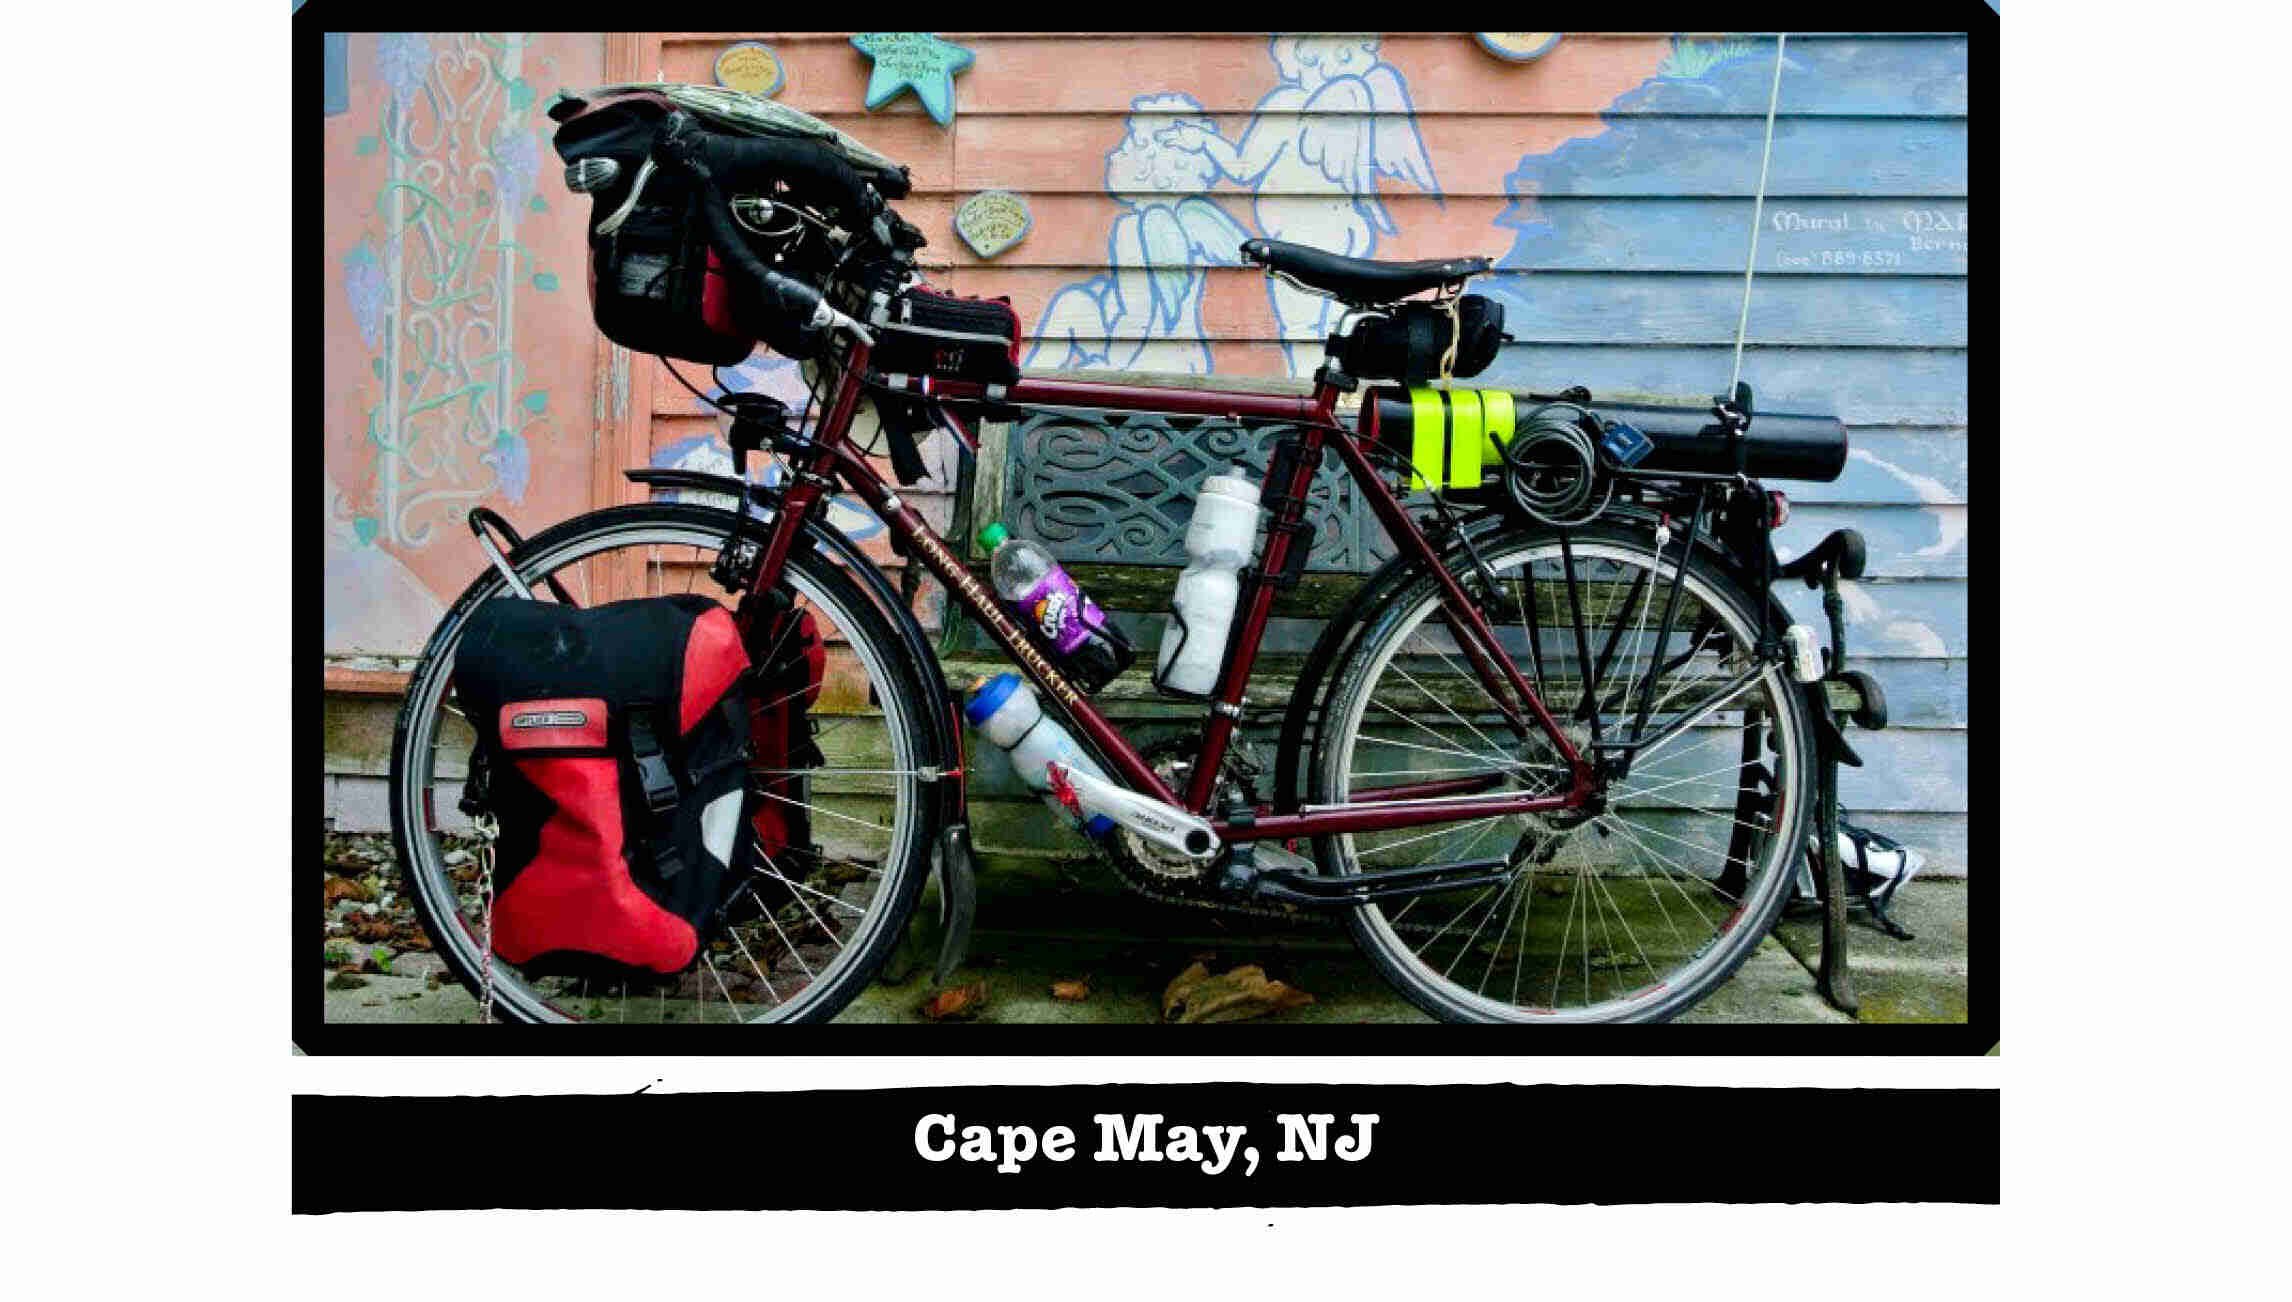 Left side view of a Surly Trucker bike, loaded with gear, in front of a wall with a mural - Cape May, NJ tag below image